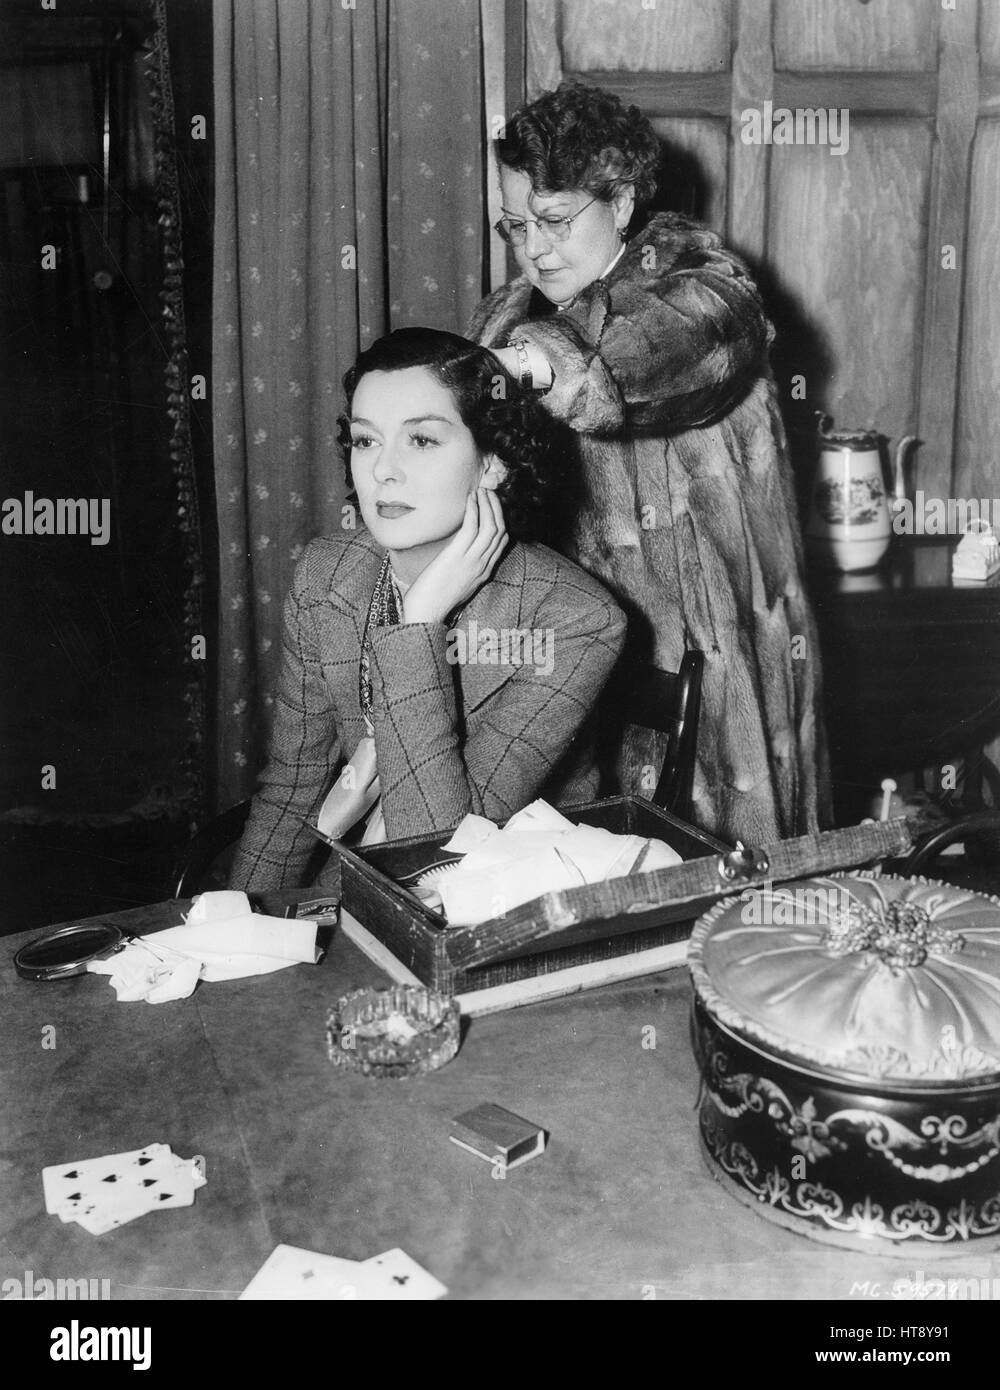 'Here's a candid peek at Rosalind Russell between scenes on Metro-Goldwyn-Mayer's 'Night Must Fall' set. Robert Montgomery is starred in this weird mystery drama, under the direction of Richard Thorpe.' Stock Photo